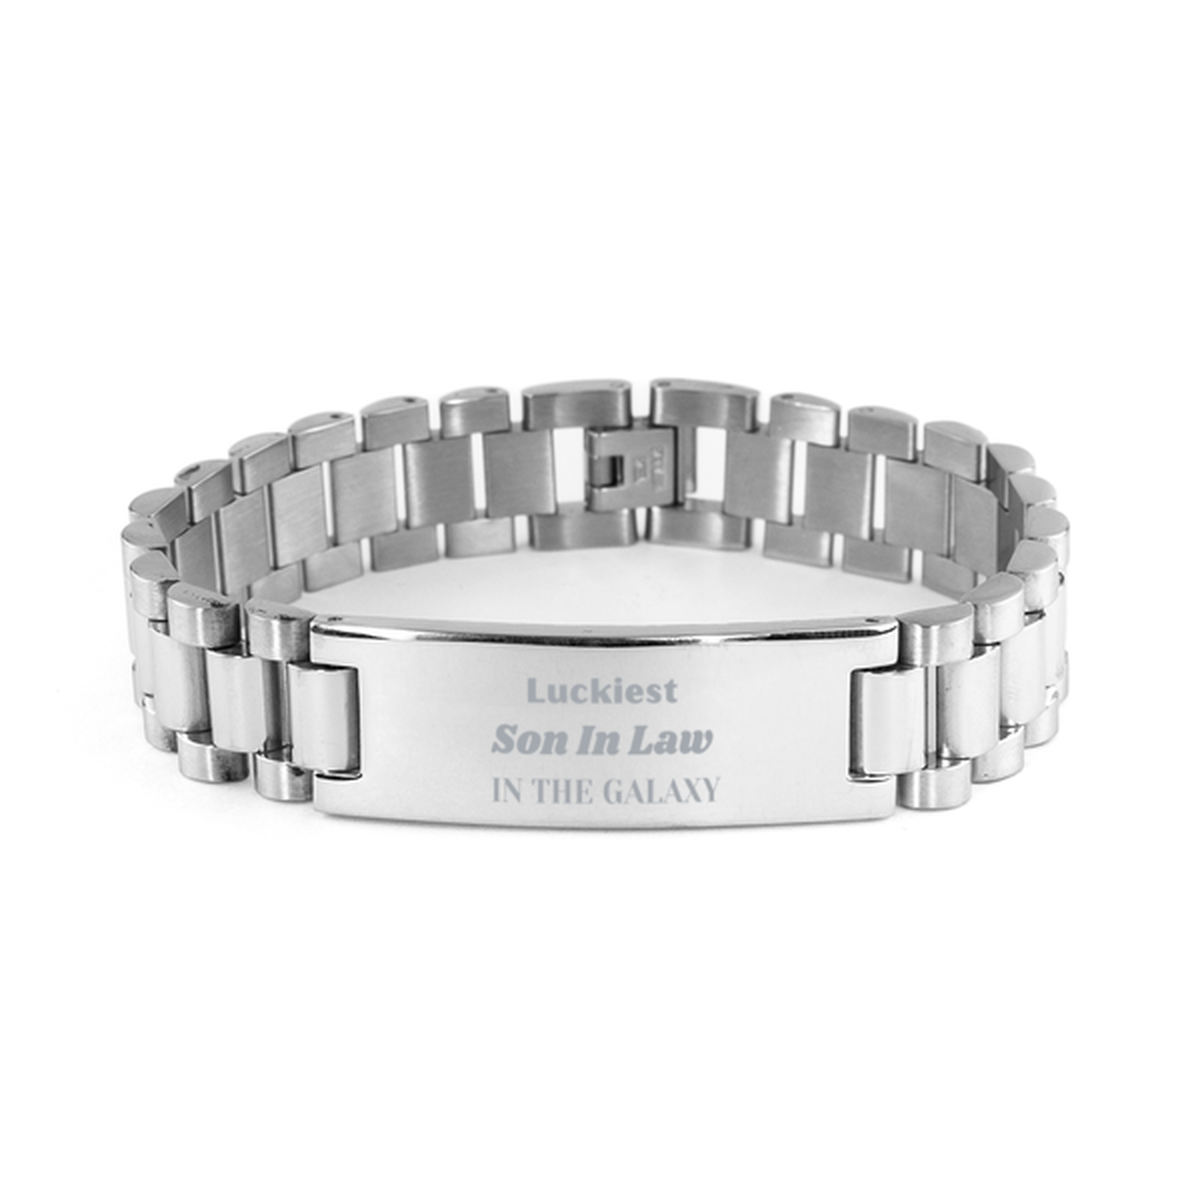 Luckiest Son In Law in the Galaxy, To My Son In Law Engraved Gifts, Christmas Son In Law Ladder Stainless Steel Bracelet Gifts, X-mas Birthday Unique Gifts For Son In Law Men Women